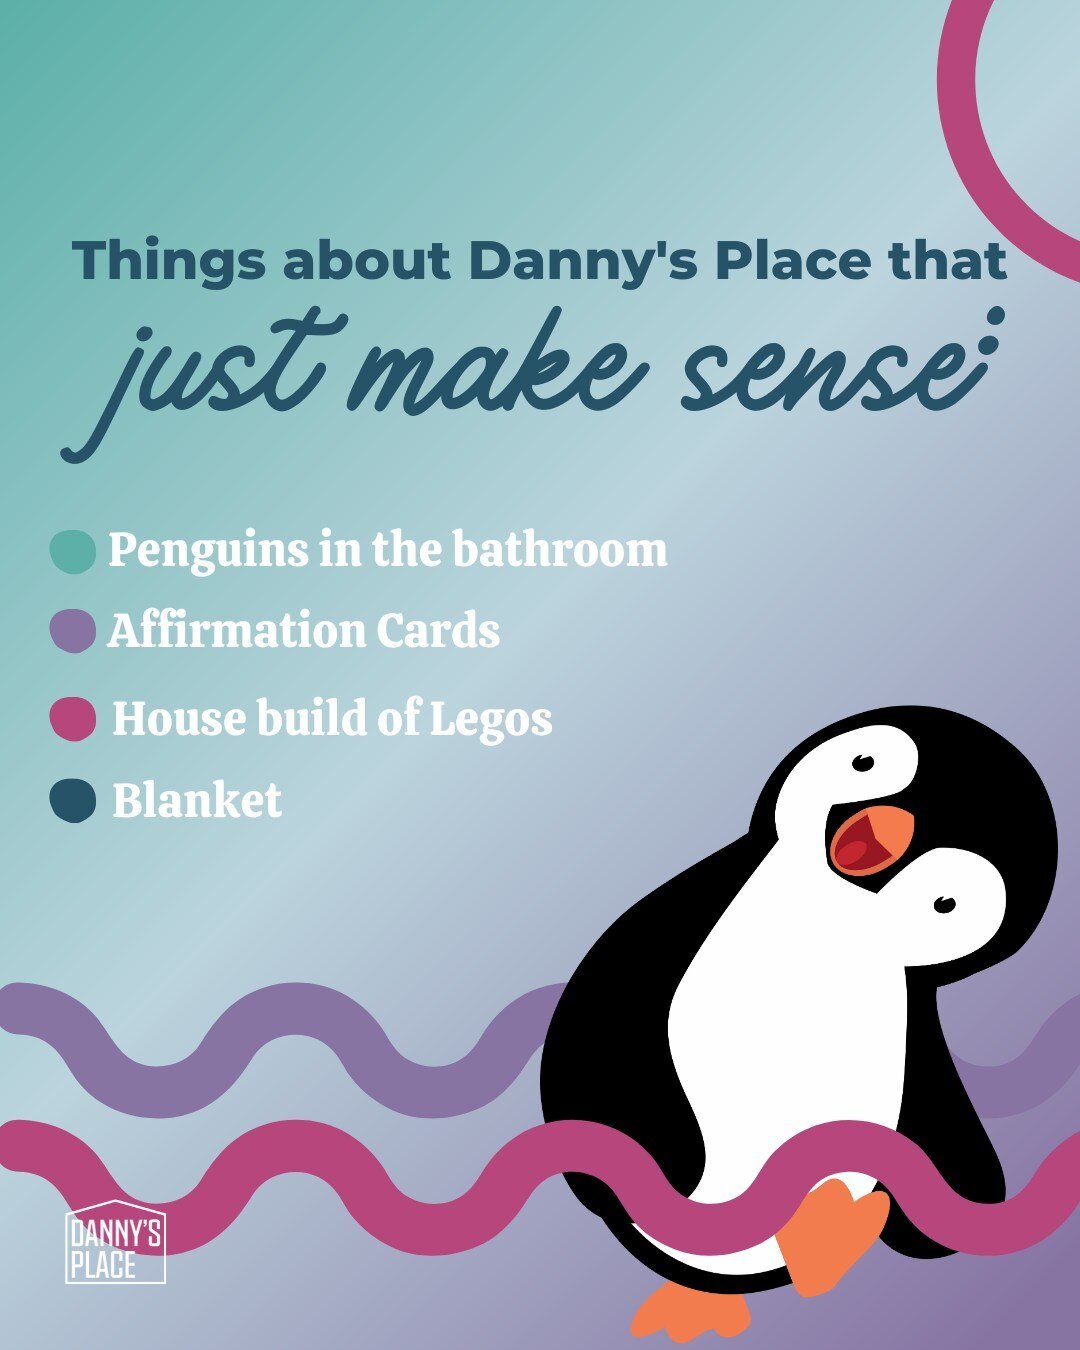 Things about Danny's Place that just make sense! 🐧

🐧 More than hundred penguins in the bathroom 🤭
✨ Packs of affirmation cards for the participants and for our staff!
🏠 House build of Legos (currently under construction bc it was well used this 